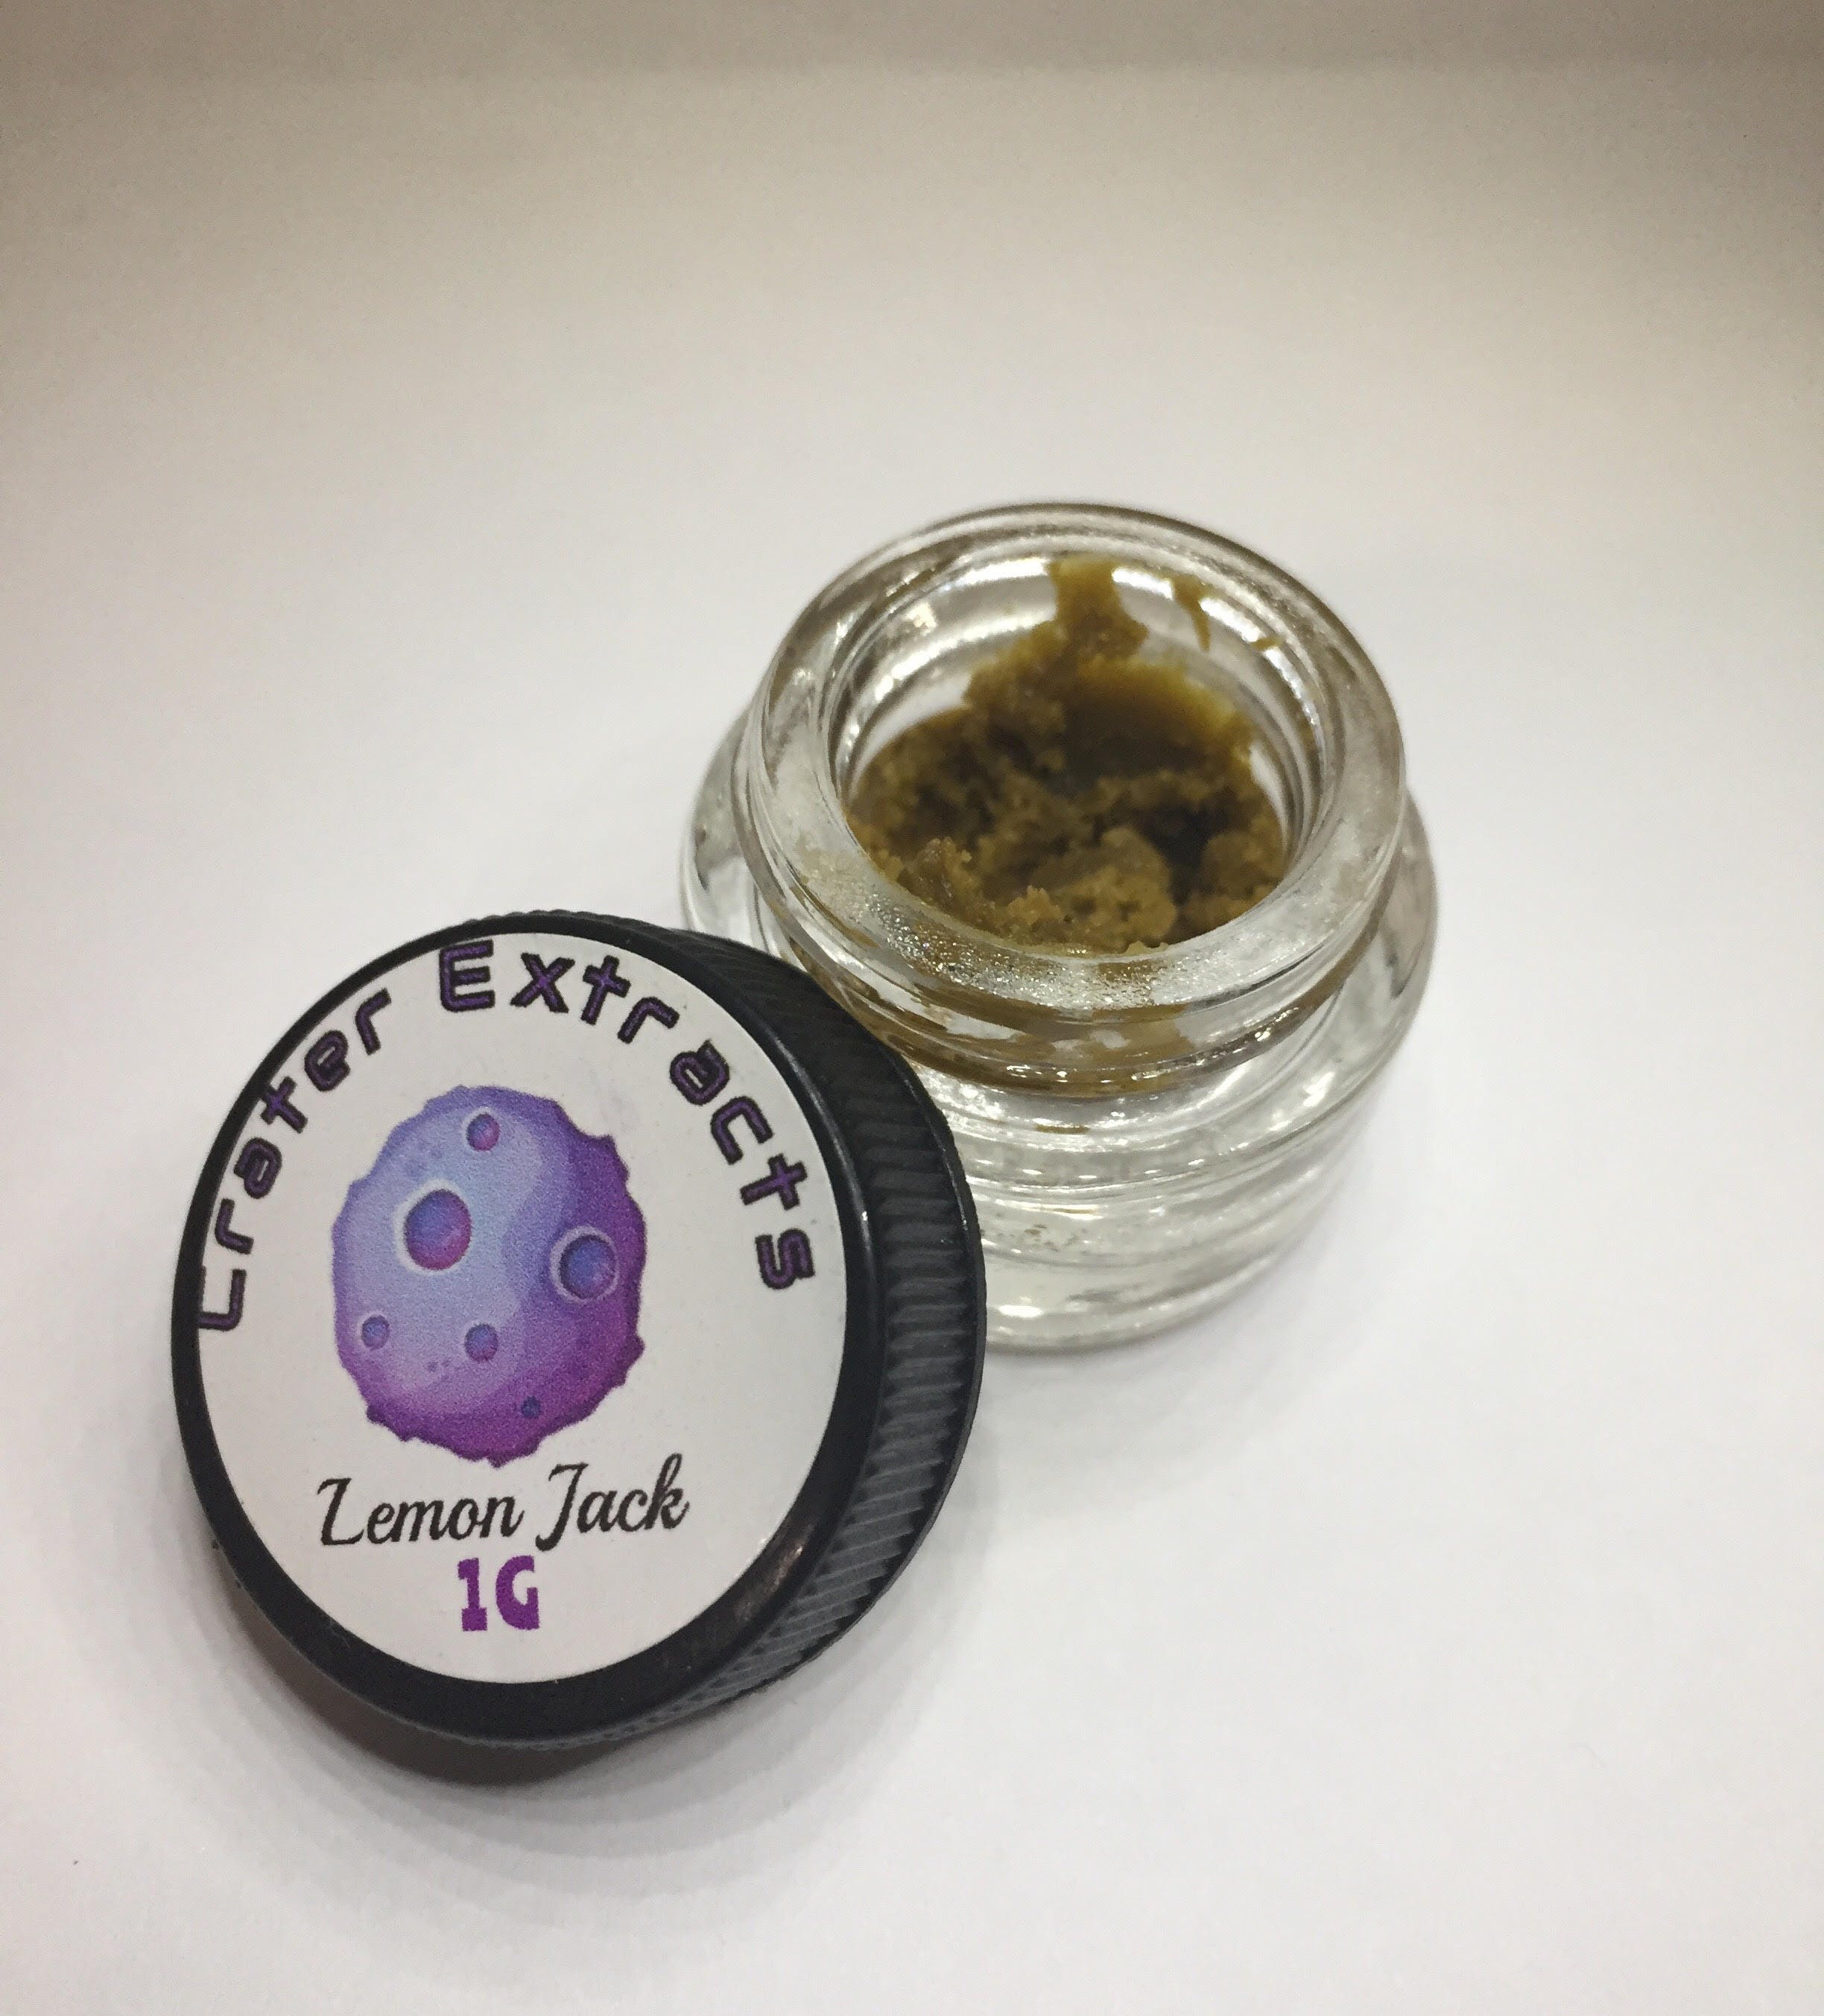 Crater Extracts - Lemon Jack